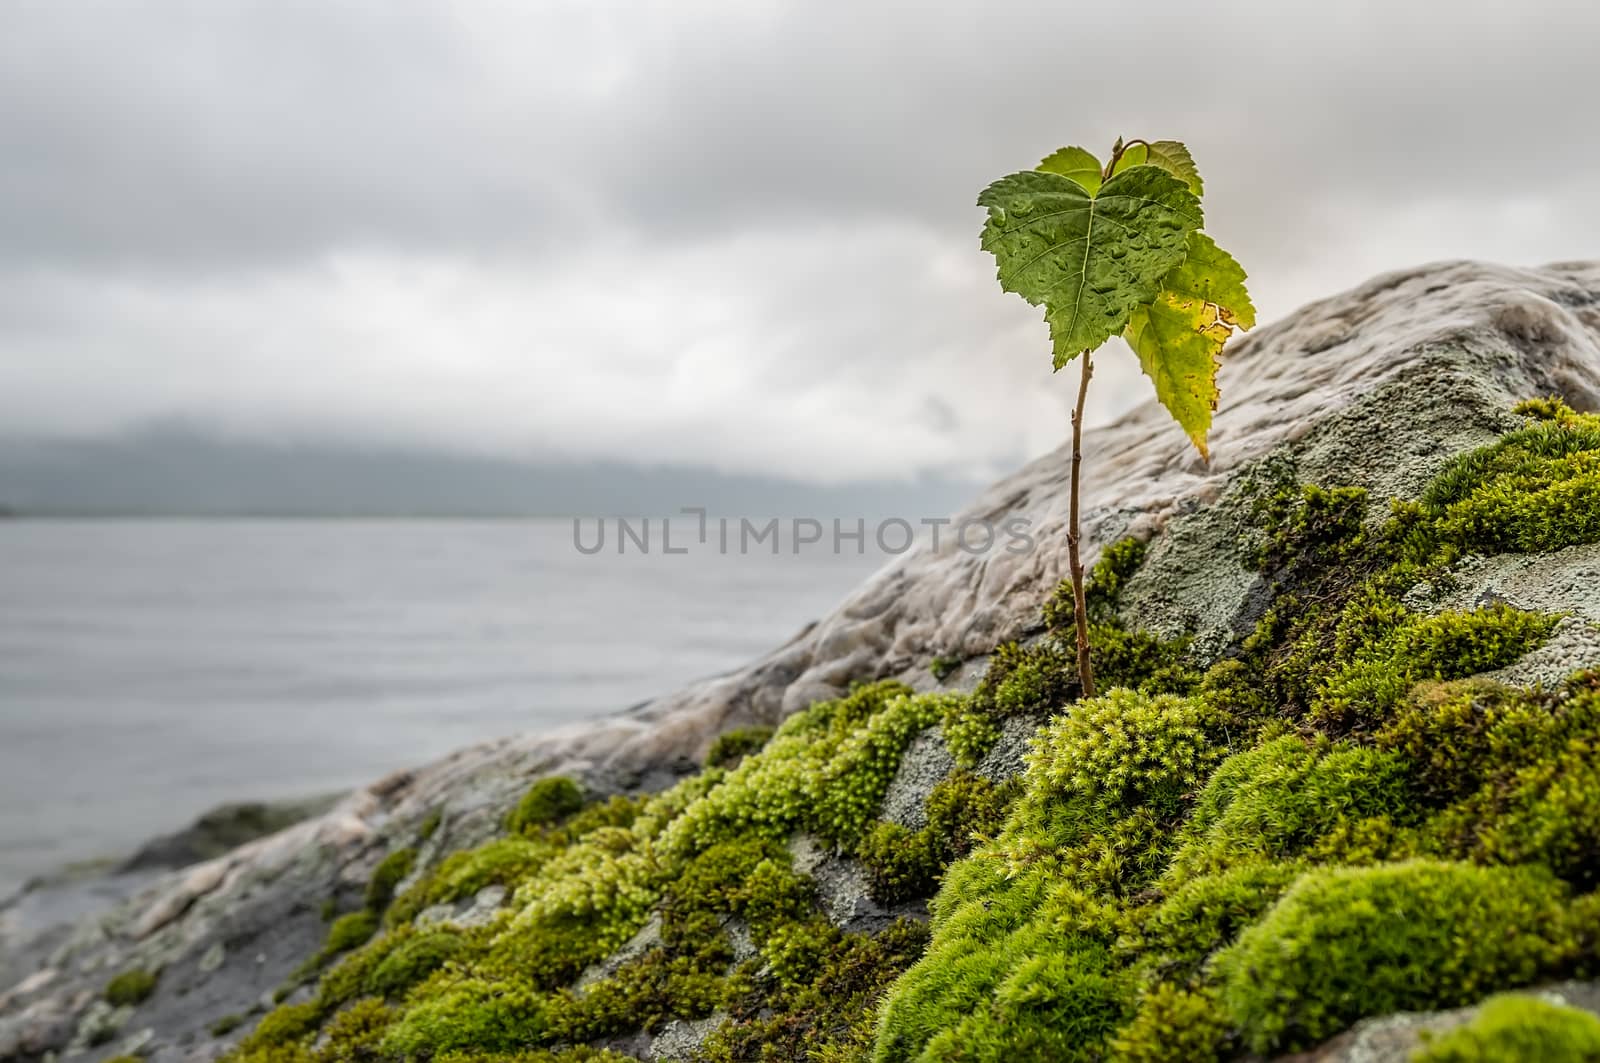 a birch sprout sprouted on a stone with moss with raindrops on the leaves against the background of a misty mountain lake